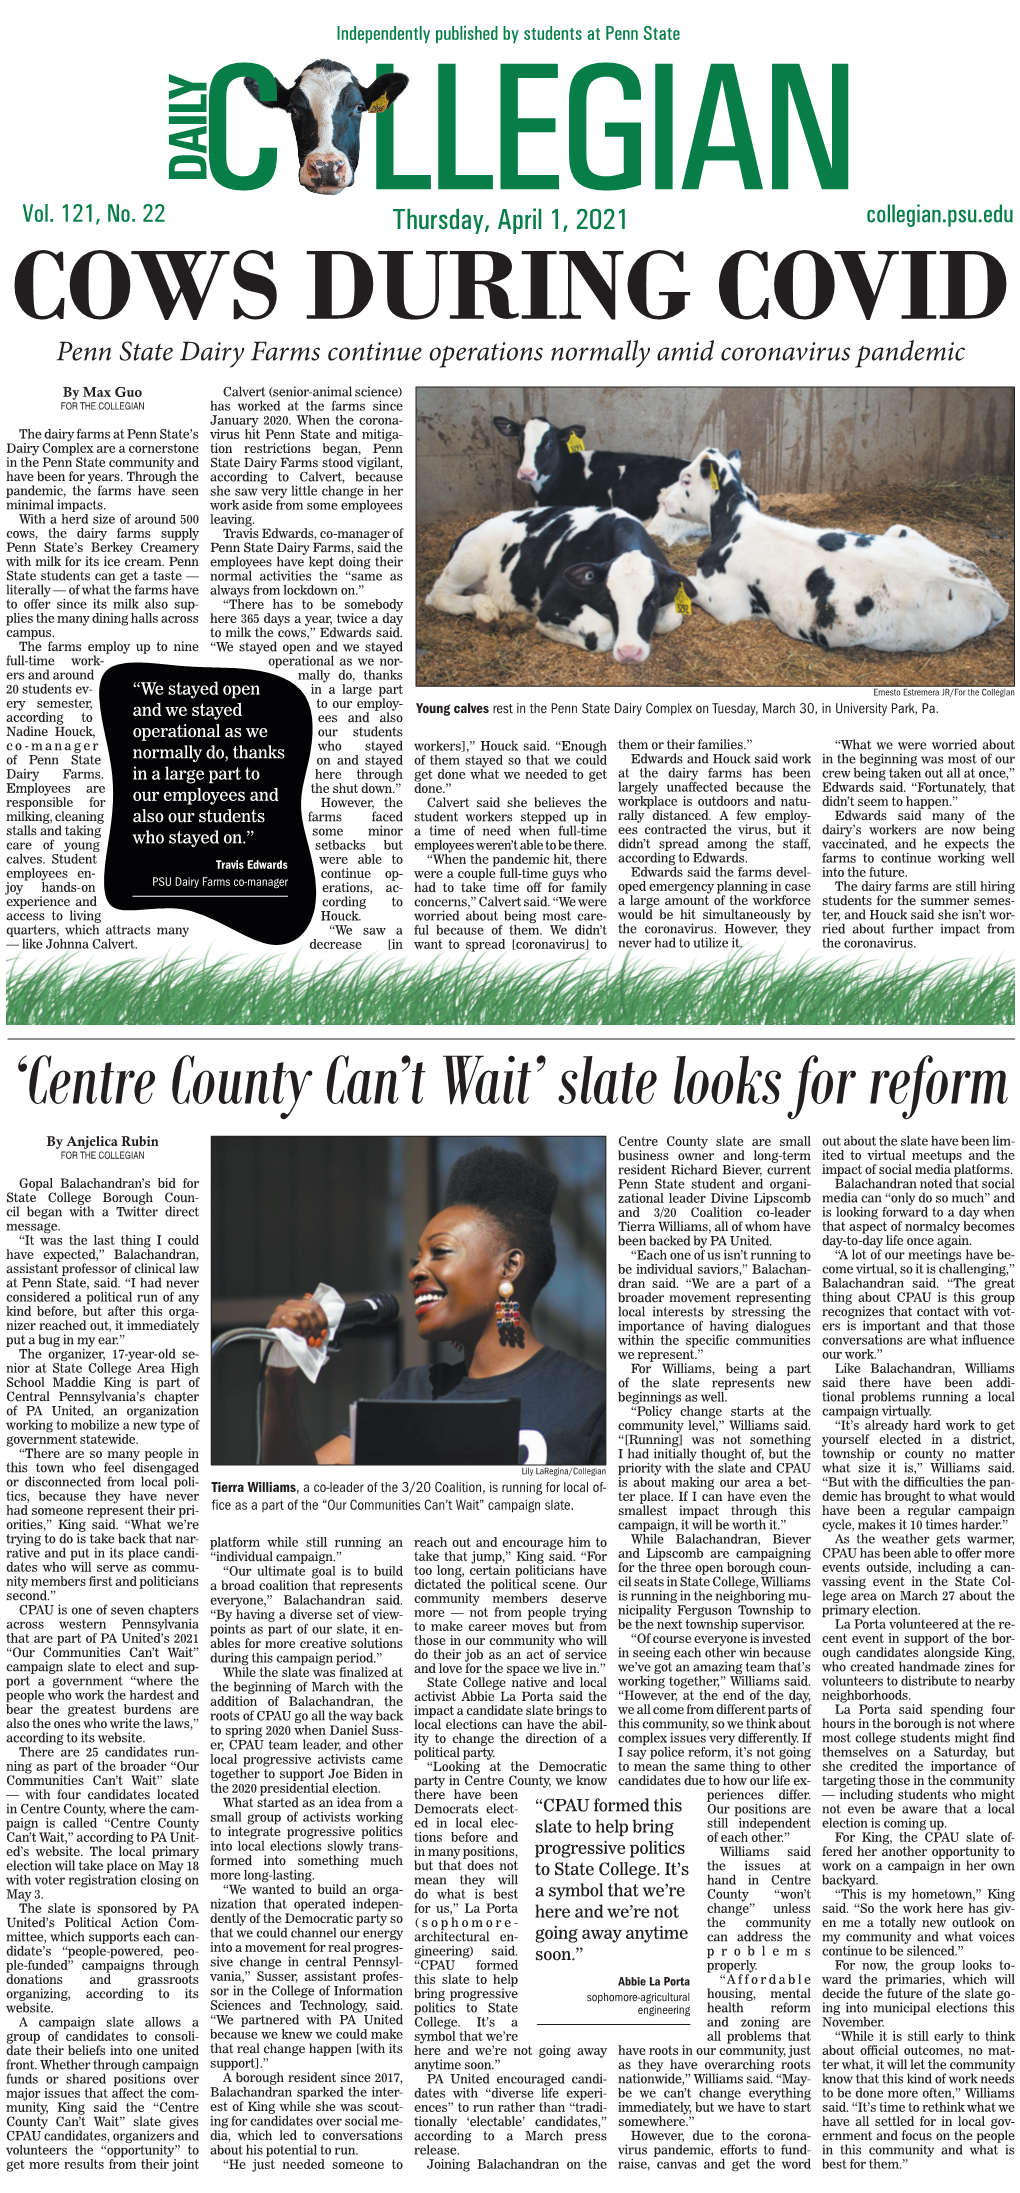 'Centre County Can't Wait' Slate Looks for Reform